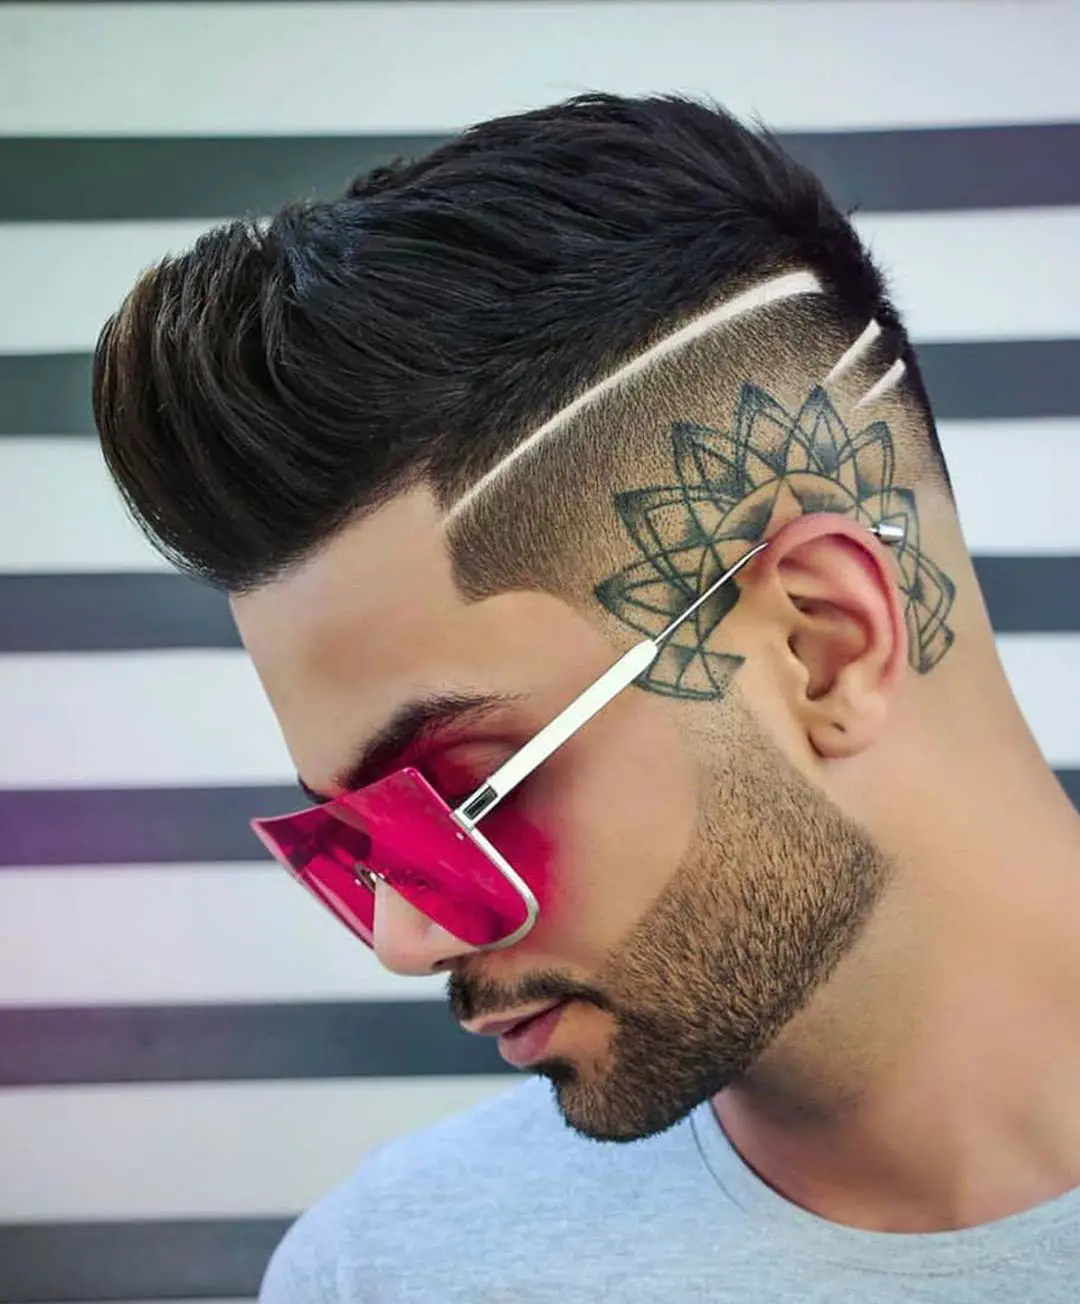 Here's the double-up cut that you need for summer